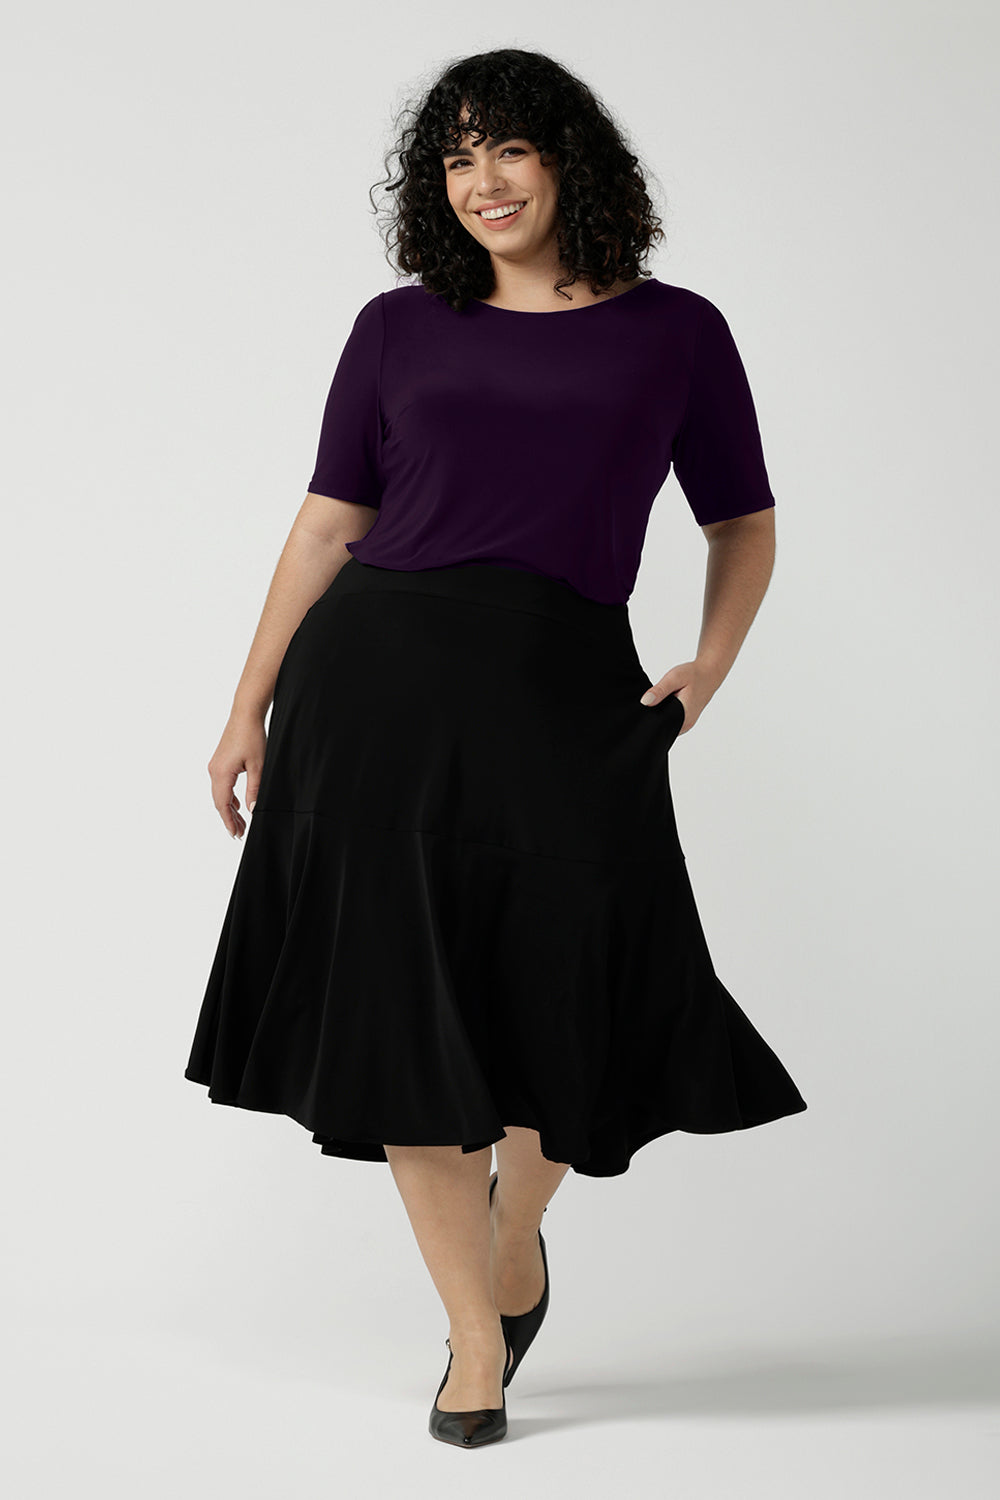 Size 18 woman wears the Ziggy top in Amethyst. Round neckline top with elbow length sleeves, sleeve head tuck. Soft comfortable jersey for stylish workwear. Made in Australia size 8 to 24.